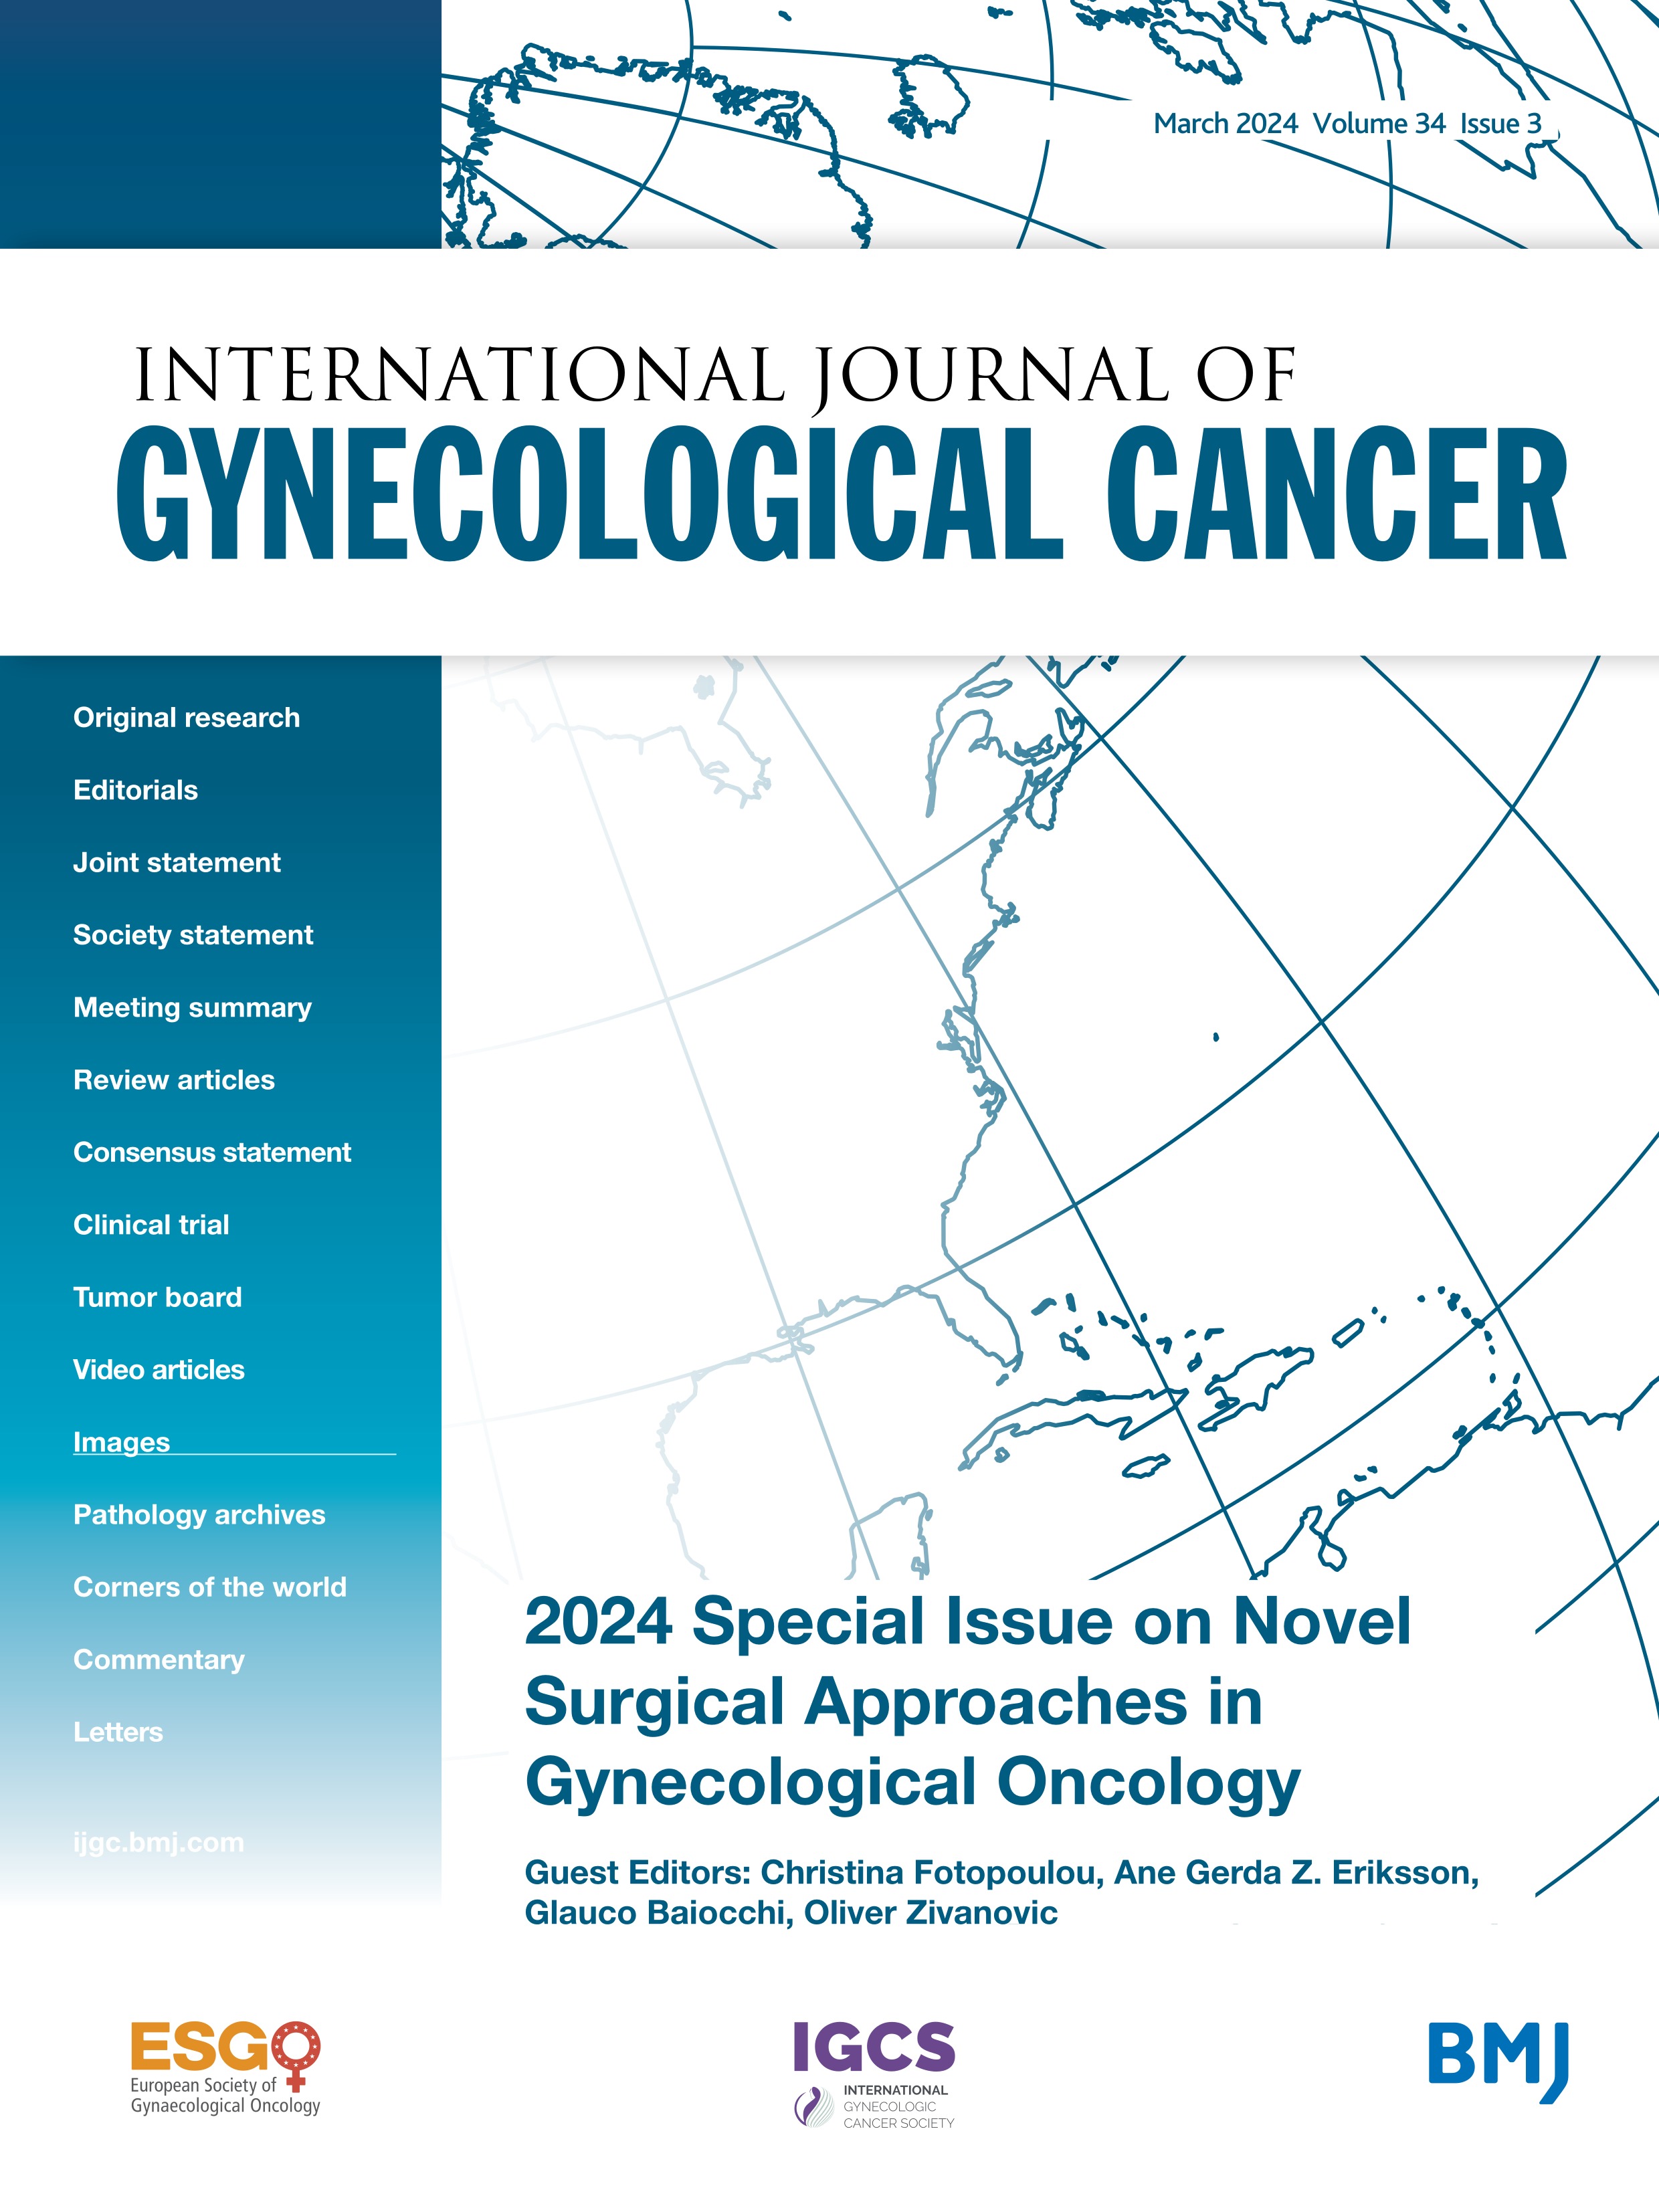 New windows of surgical opportunity for gynecological cancers in the era of targeted therapies